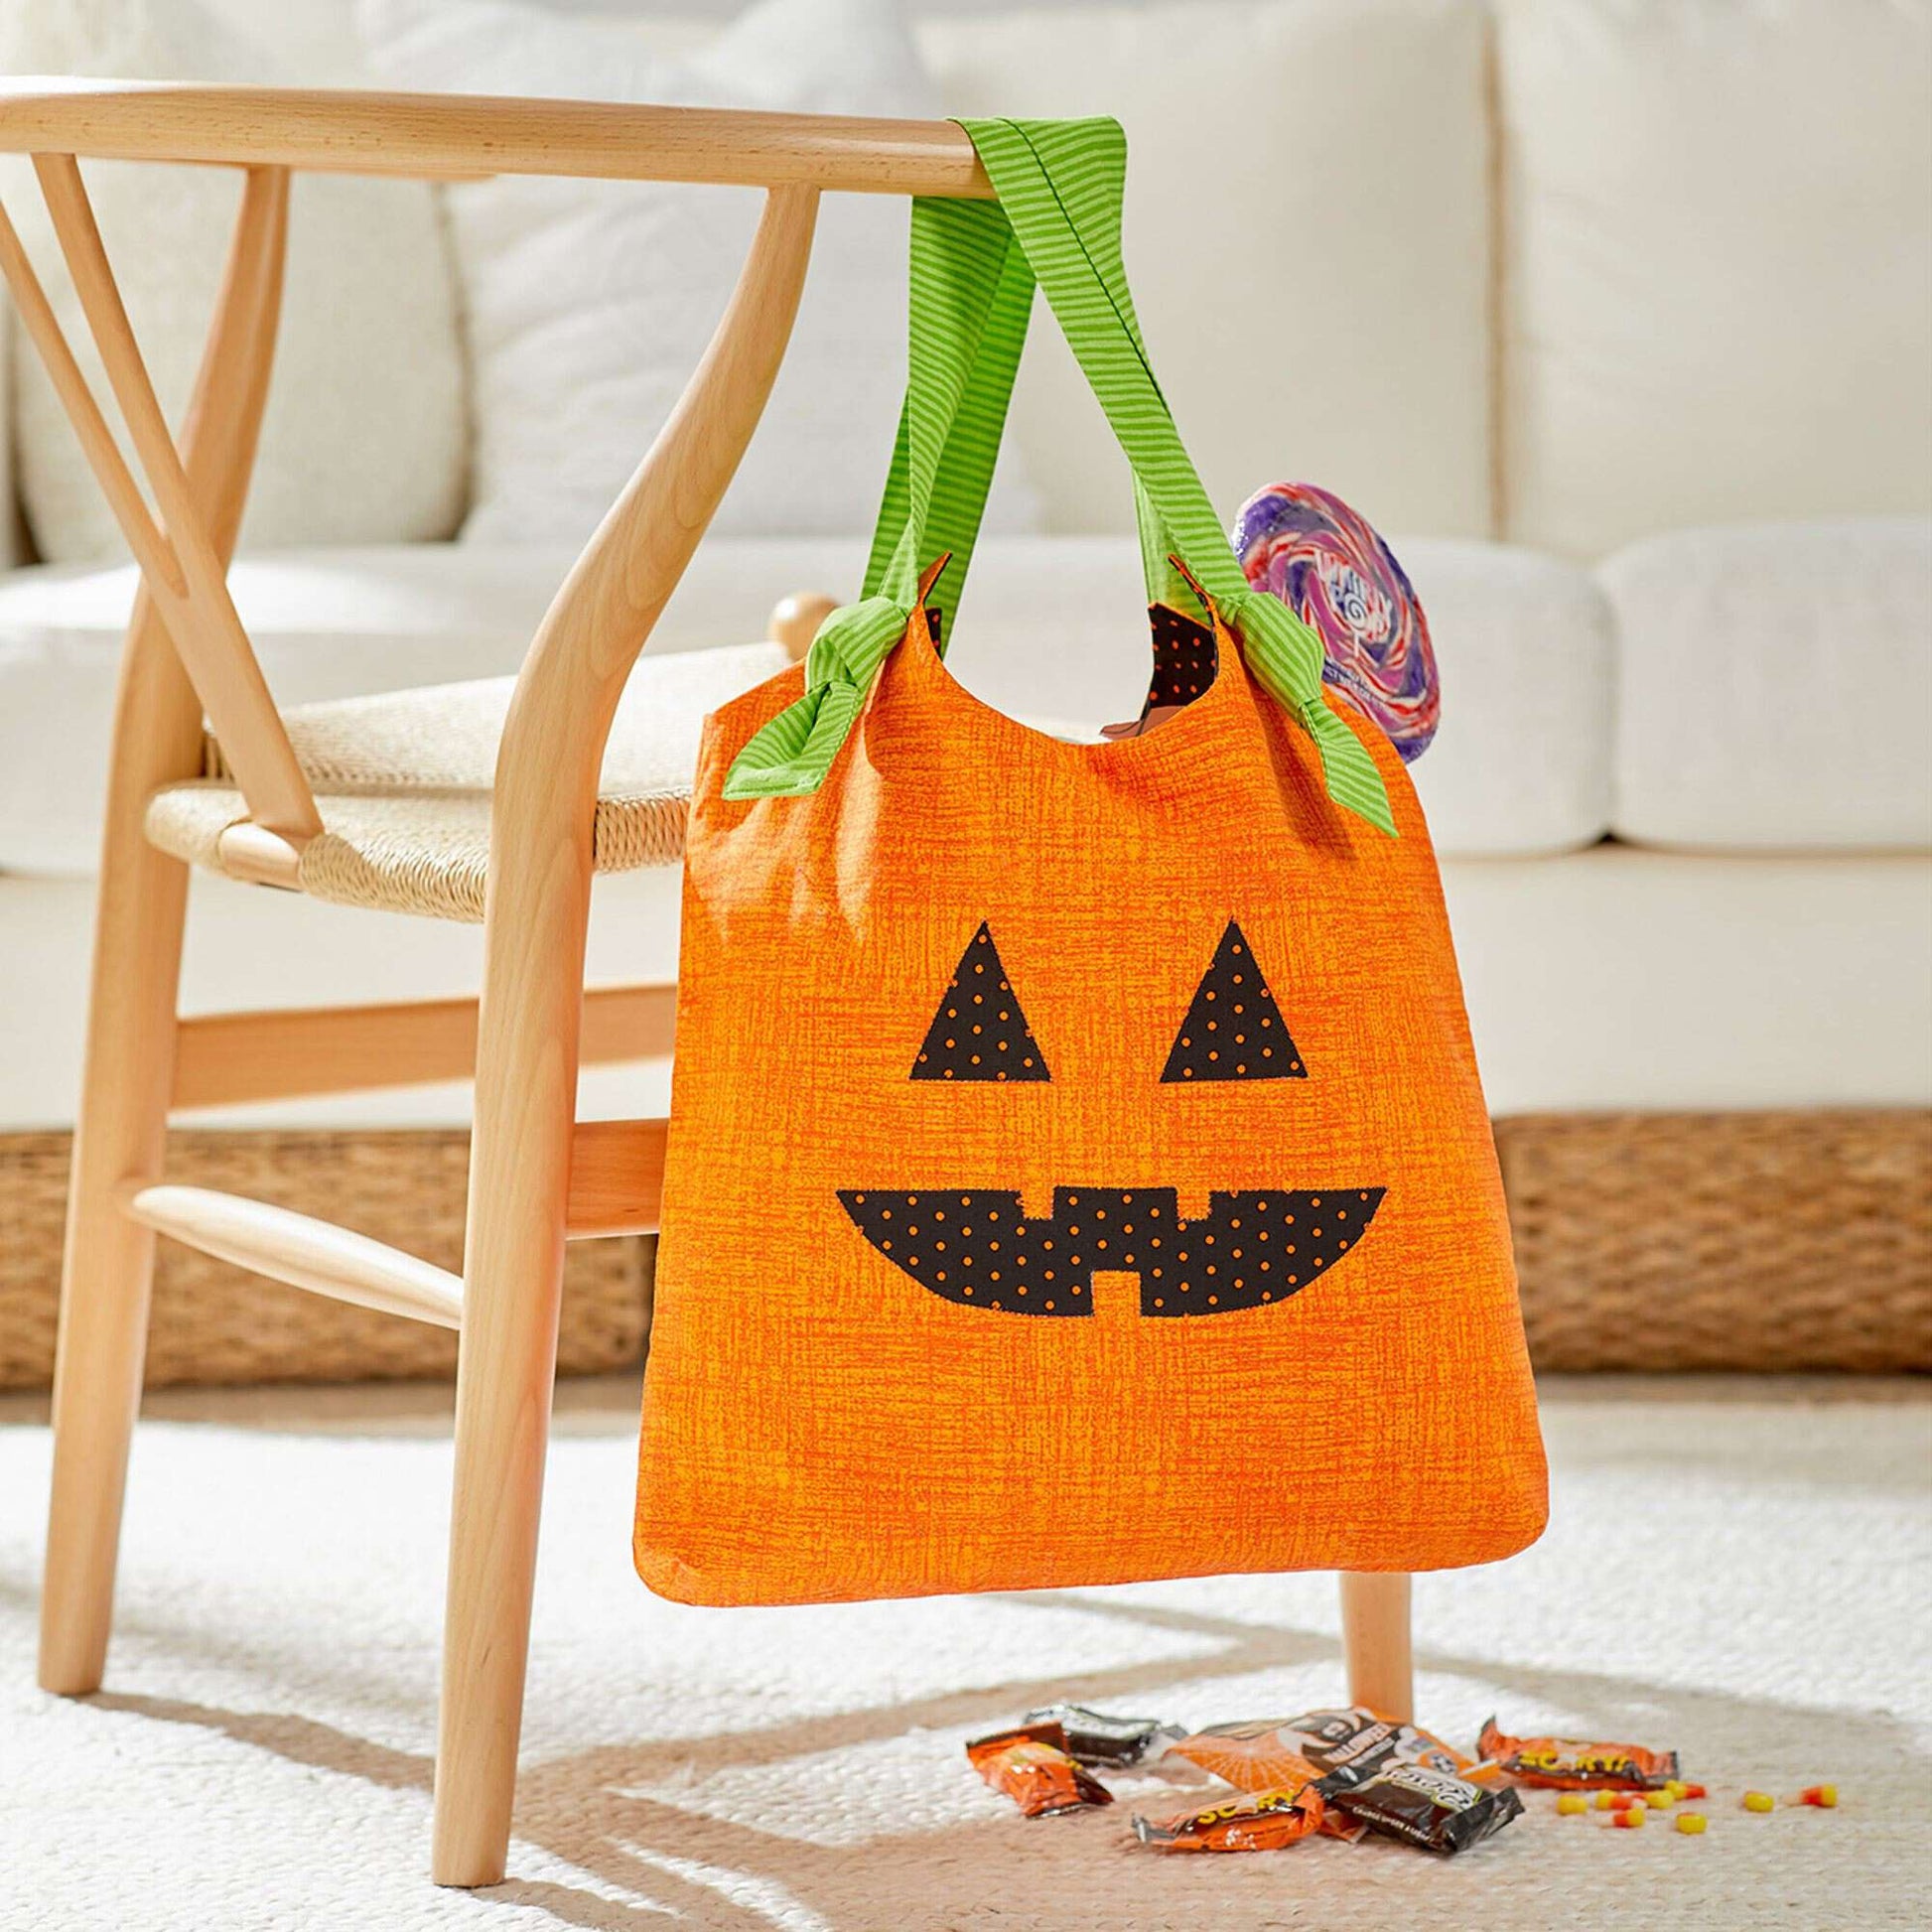 Free Coats & Clark Sewing Jack O' Lantern Tote for Halloween Pattern